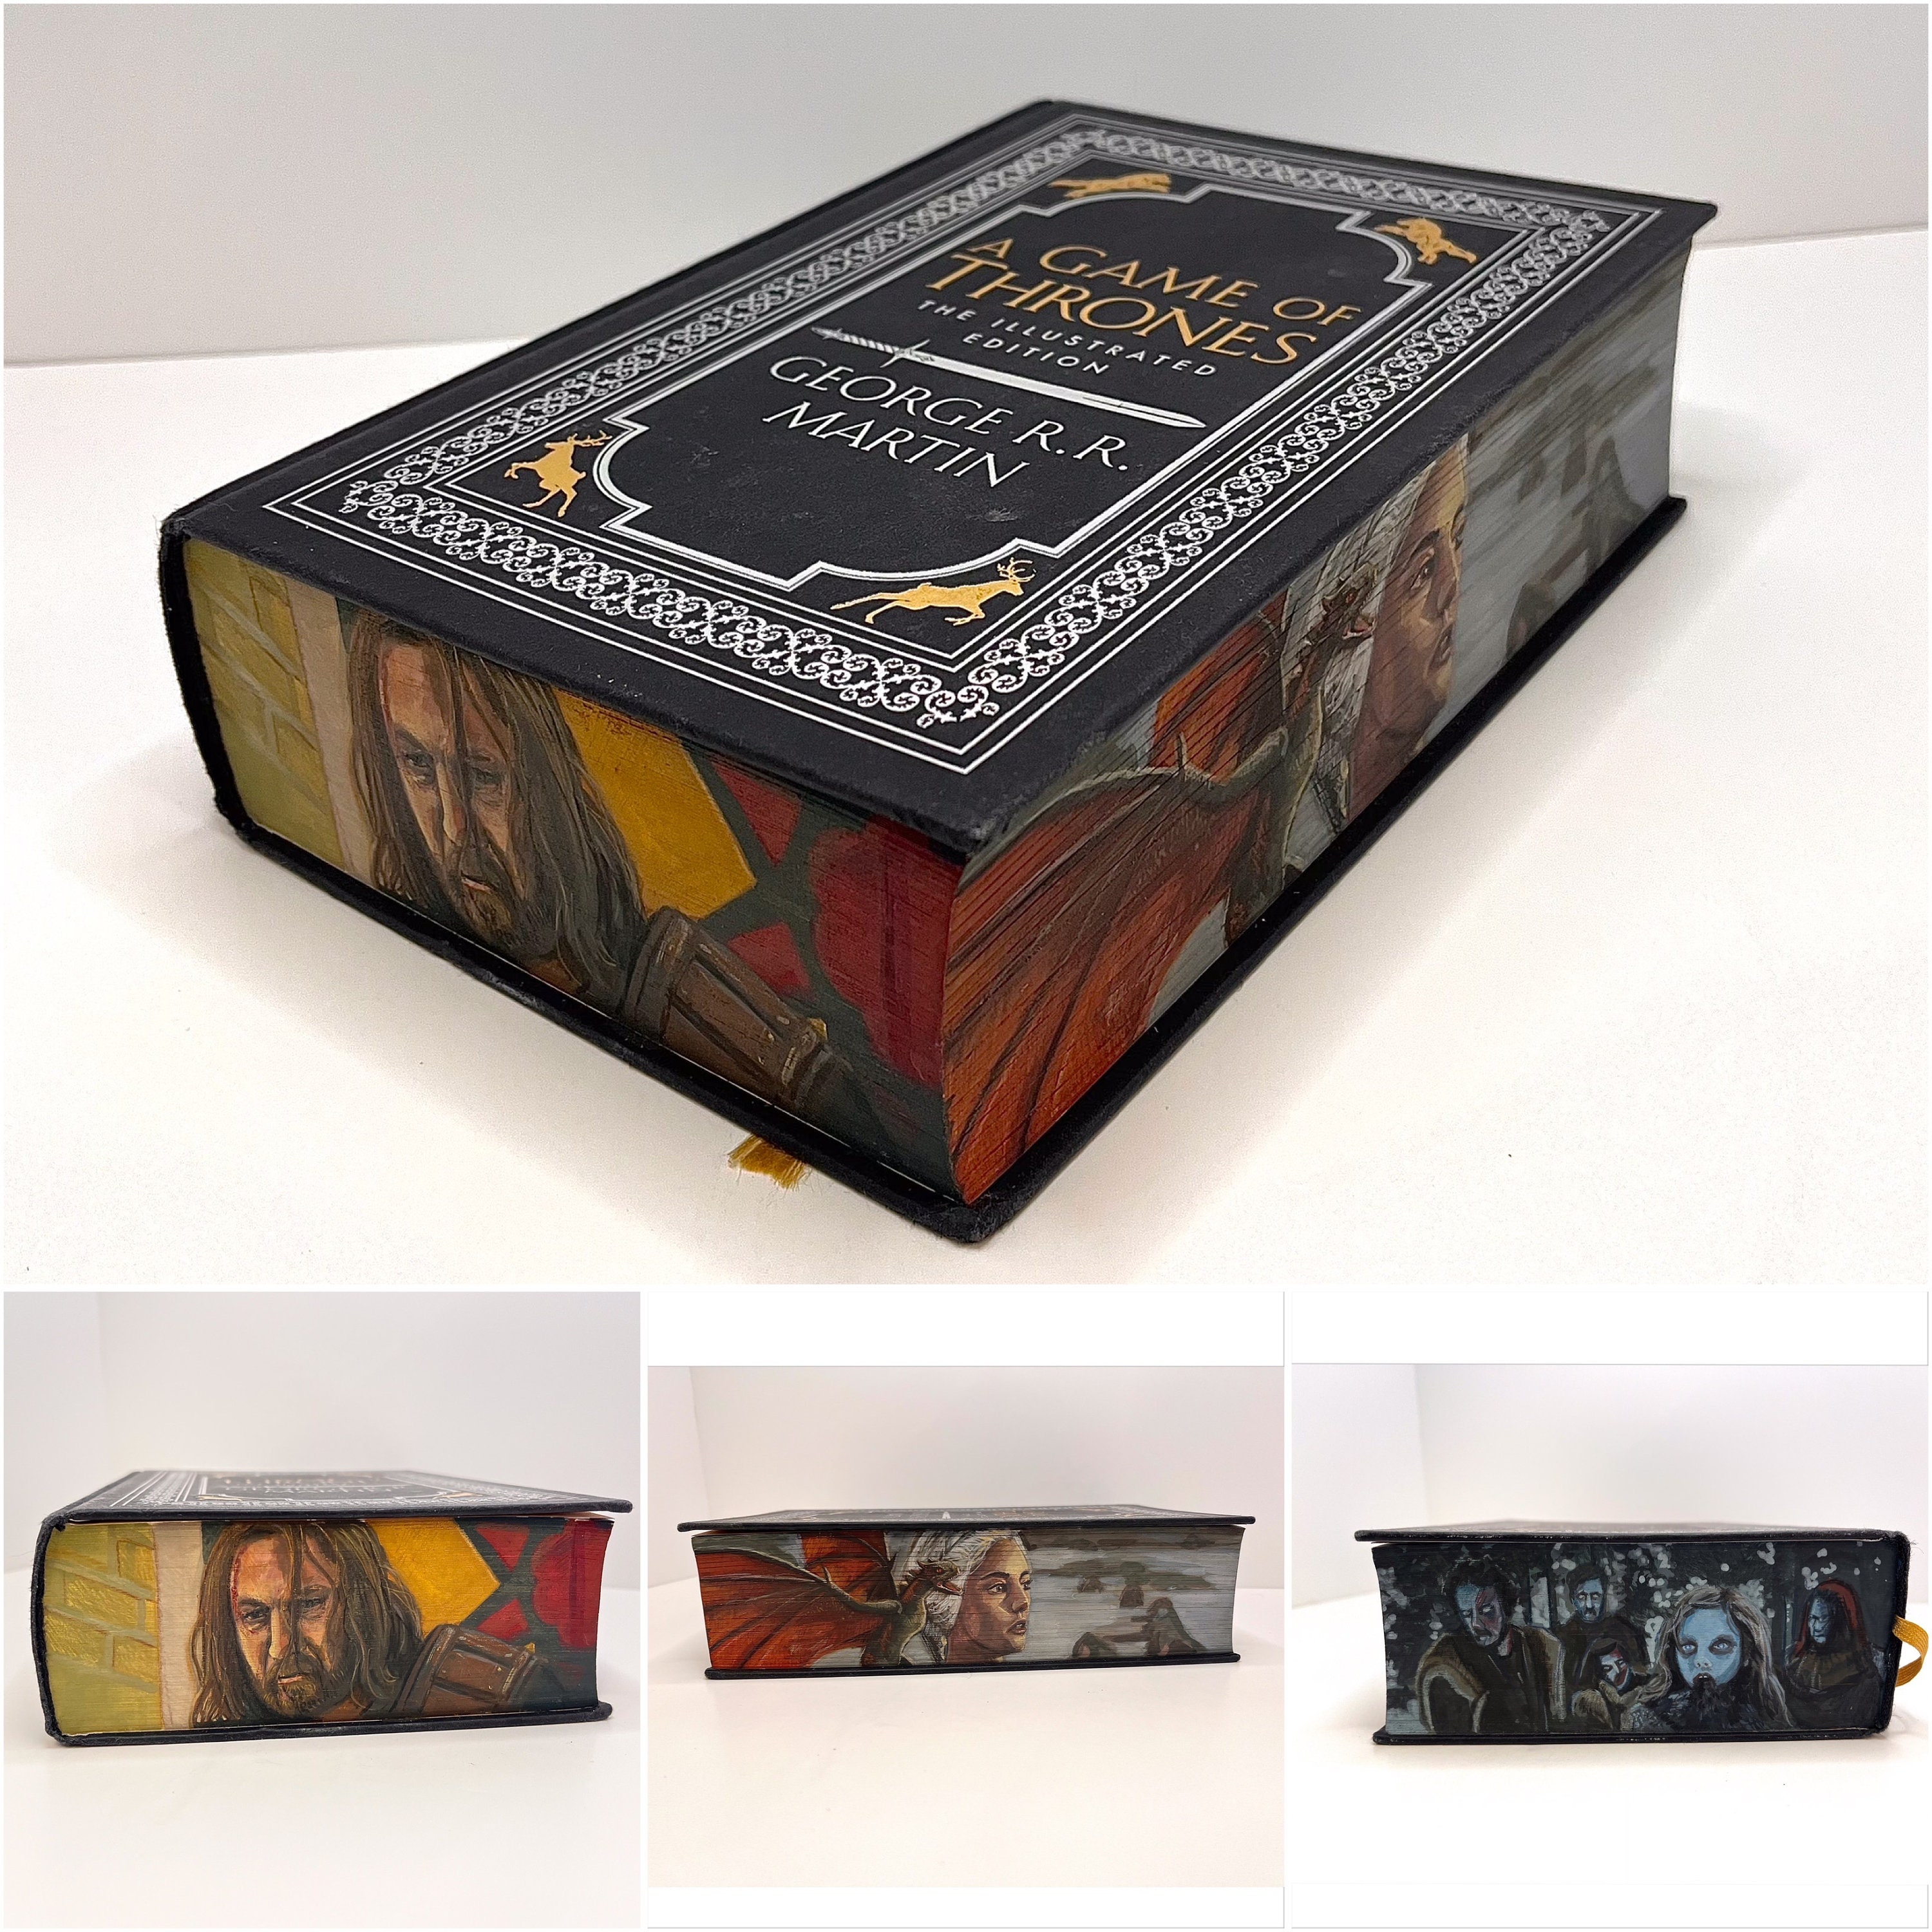 CUSTOM BOOK EDGES Hand-painted Sprayed Edges Special Edition Books  Collector's Edition Bookish Gift Eco 